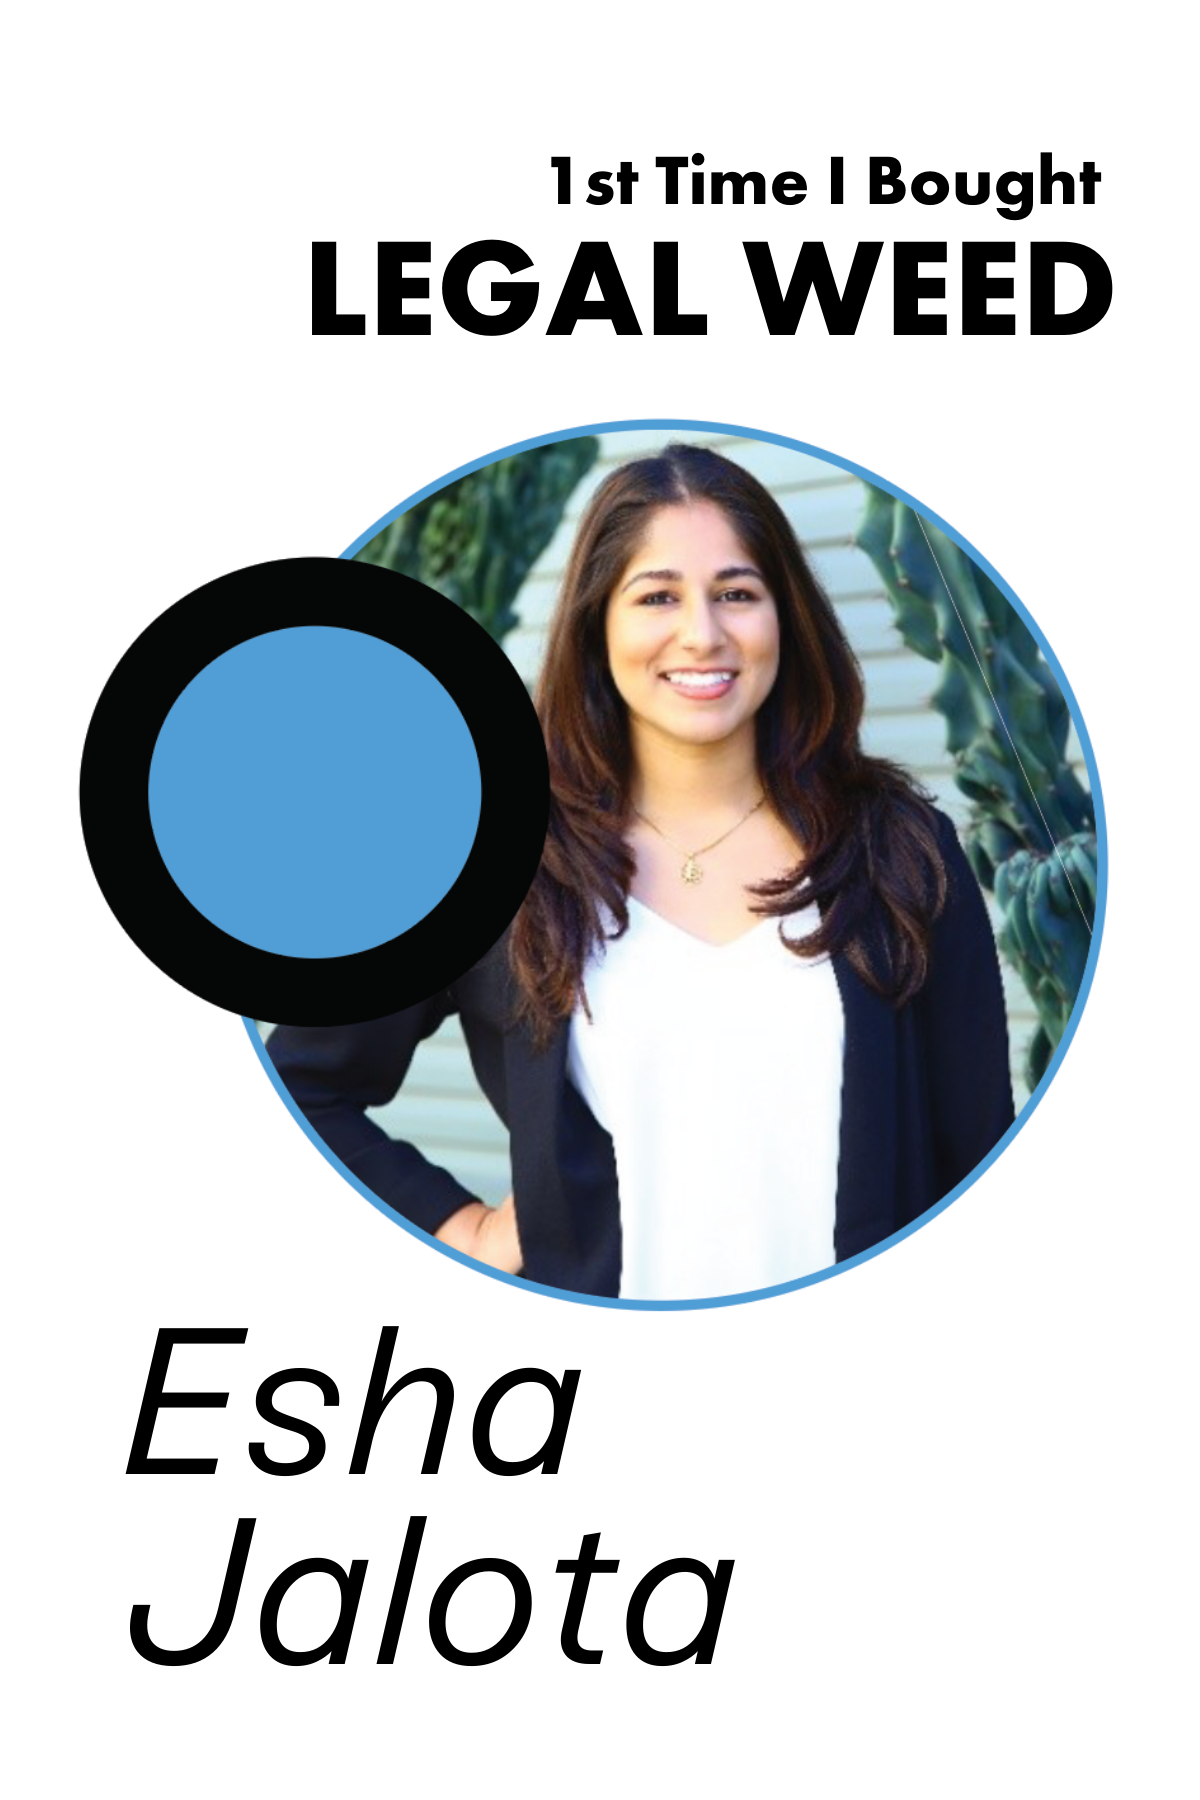 76. 1st Time I Bought Legal Weed: Esha Jalota, Growth Manager at Quim